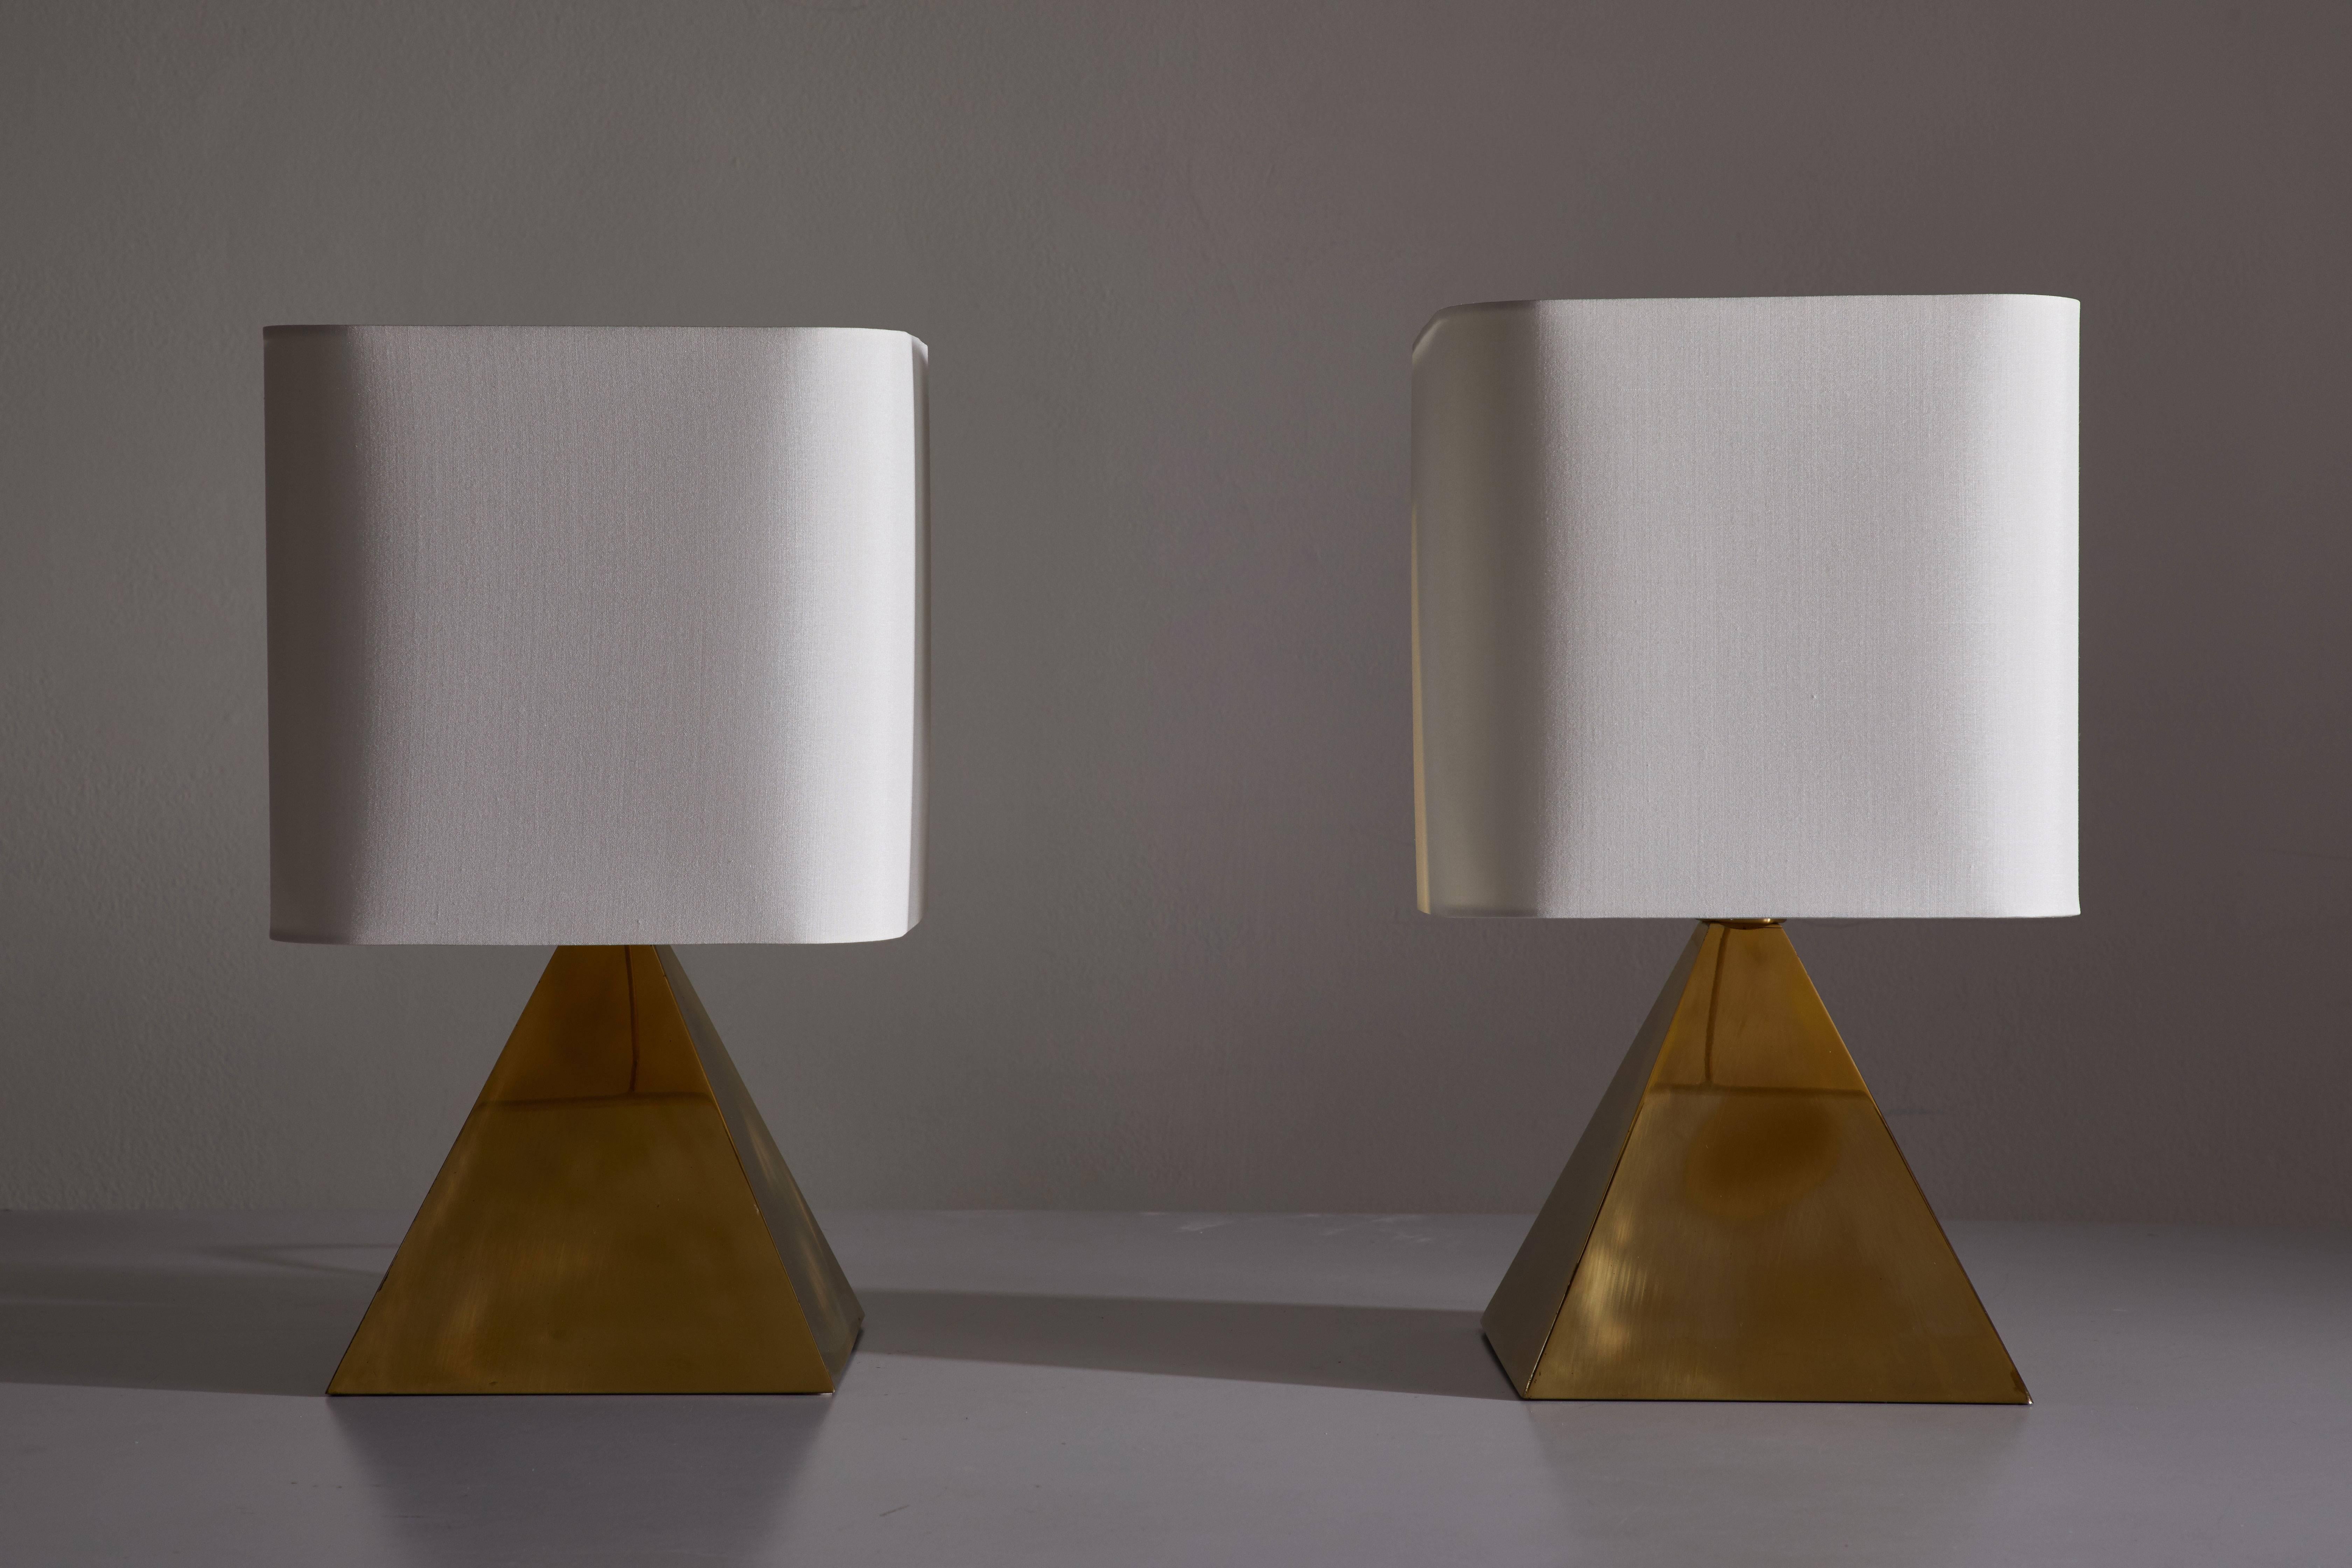 Pair of pyramid shaped hollowed brass table lamps designed in Italy, circa 1970s. Custom fabricated silk shades. Original cords. Each light takes one E27 75w maximum bulb.